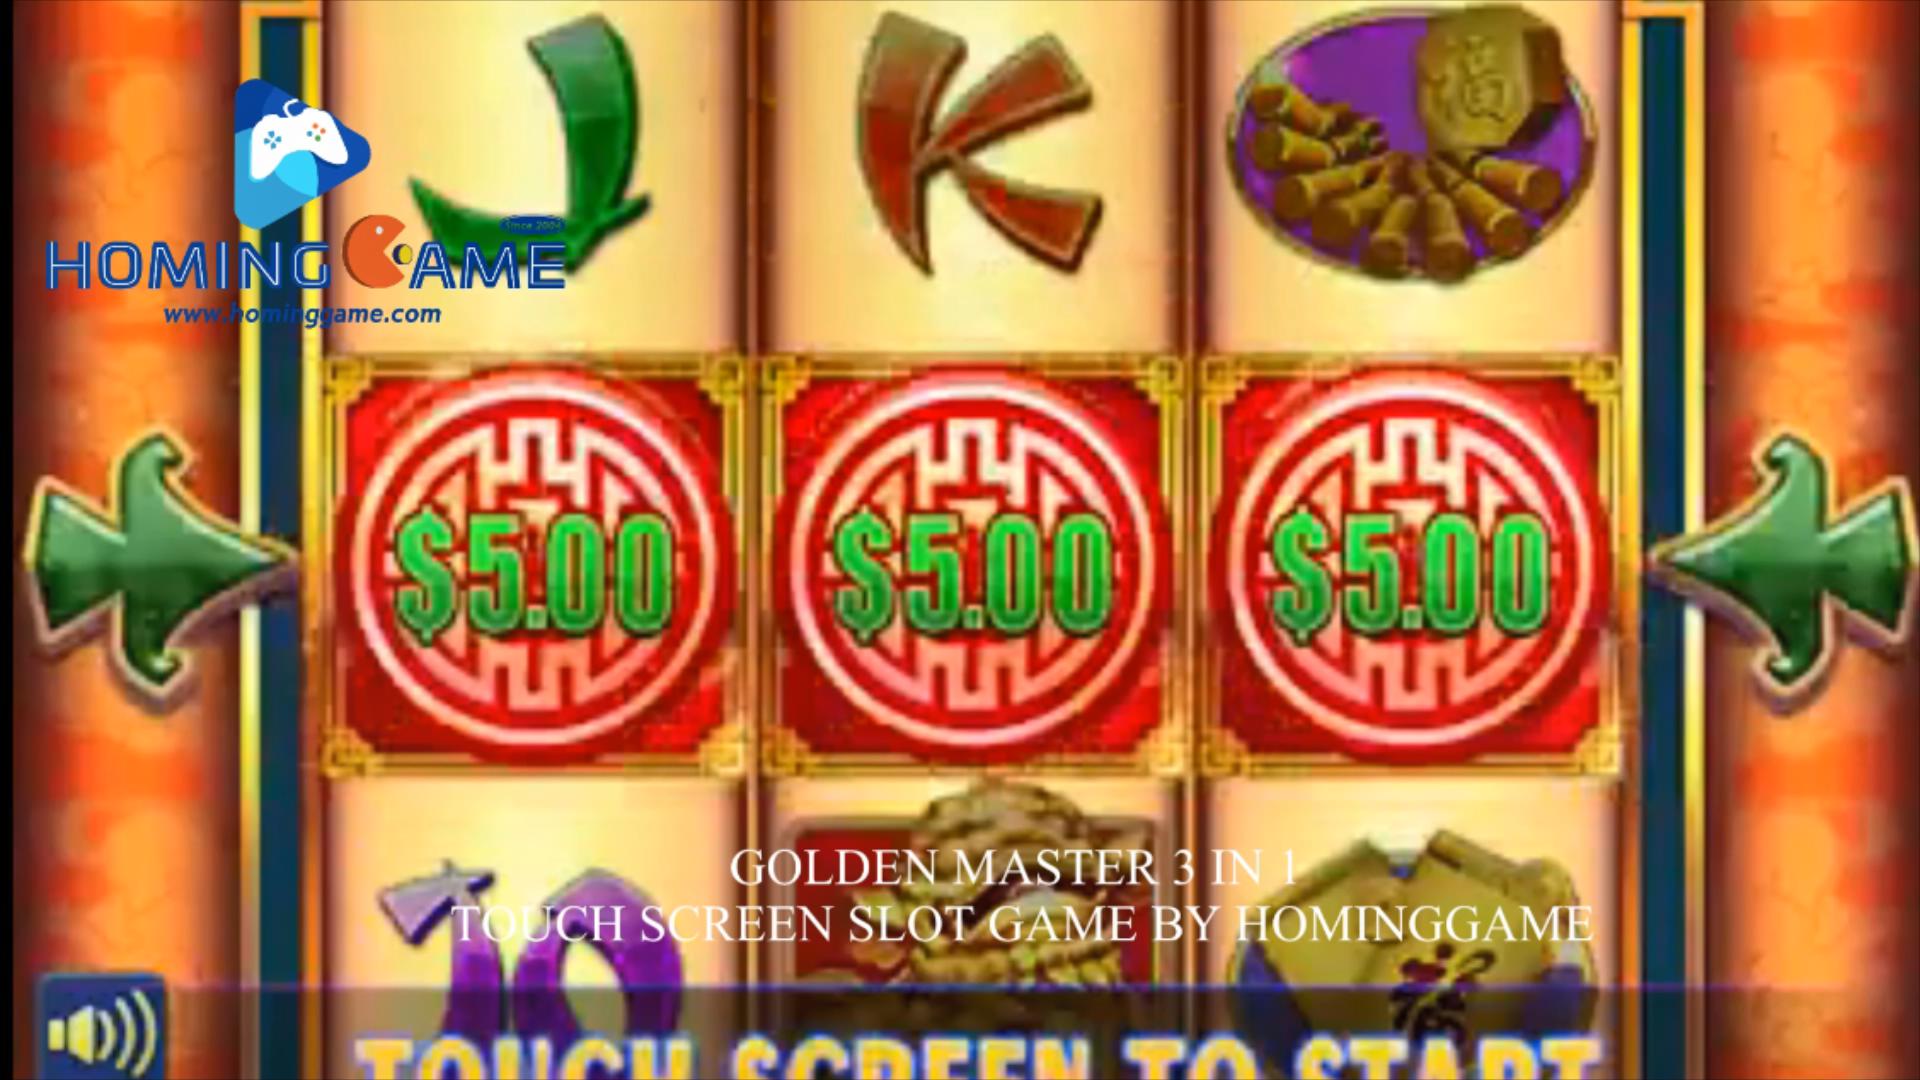 2021 IGS Original Golden Master 3 In 1 43' Touch Screen Slot Table Game Machine USA top Sale Slot Game Machine By HomingGame(Order Call Whatsapp:+8618688409495),igs golden master slot table game machine,golden master slot table gaming machine,golden master,igs golden master touch screen slot table game machine,43' touch monitor 8 in 1 fire link slot table game machine,32' touch monitor 8 in 1 fire link slot table game machine,fire link slot table game,,ultimate fire link,ultimate fire link slot game machine,ultimate fire link slot game,fire link slot game machine,fire link,ultimate fire link slot gaming machine,ultimate fire link slot table gaming machine,slot game,slot table game,slot gaming machine,game machine,arcade game machine,coin operated game machine,arcade game machine for sale,amsuement machine,entertainment game machine,family entertainment game machine,hominggame,www.gametube.hk,indoor game machine,casino,gambling machine,electrical game machine,slot,slot game machine for sale,slot table for sale,simulator game machine,video game machine,video game,video game machine for sale,hominggame fire link slot game,slot gaming